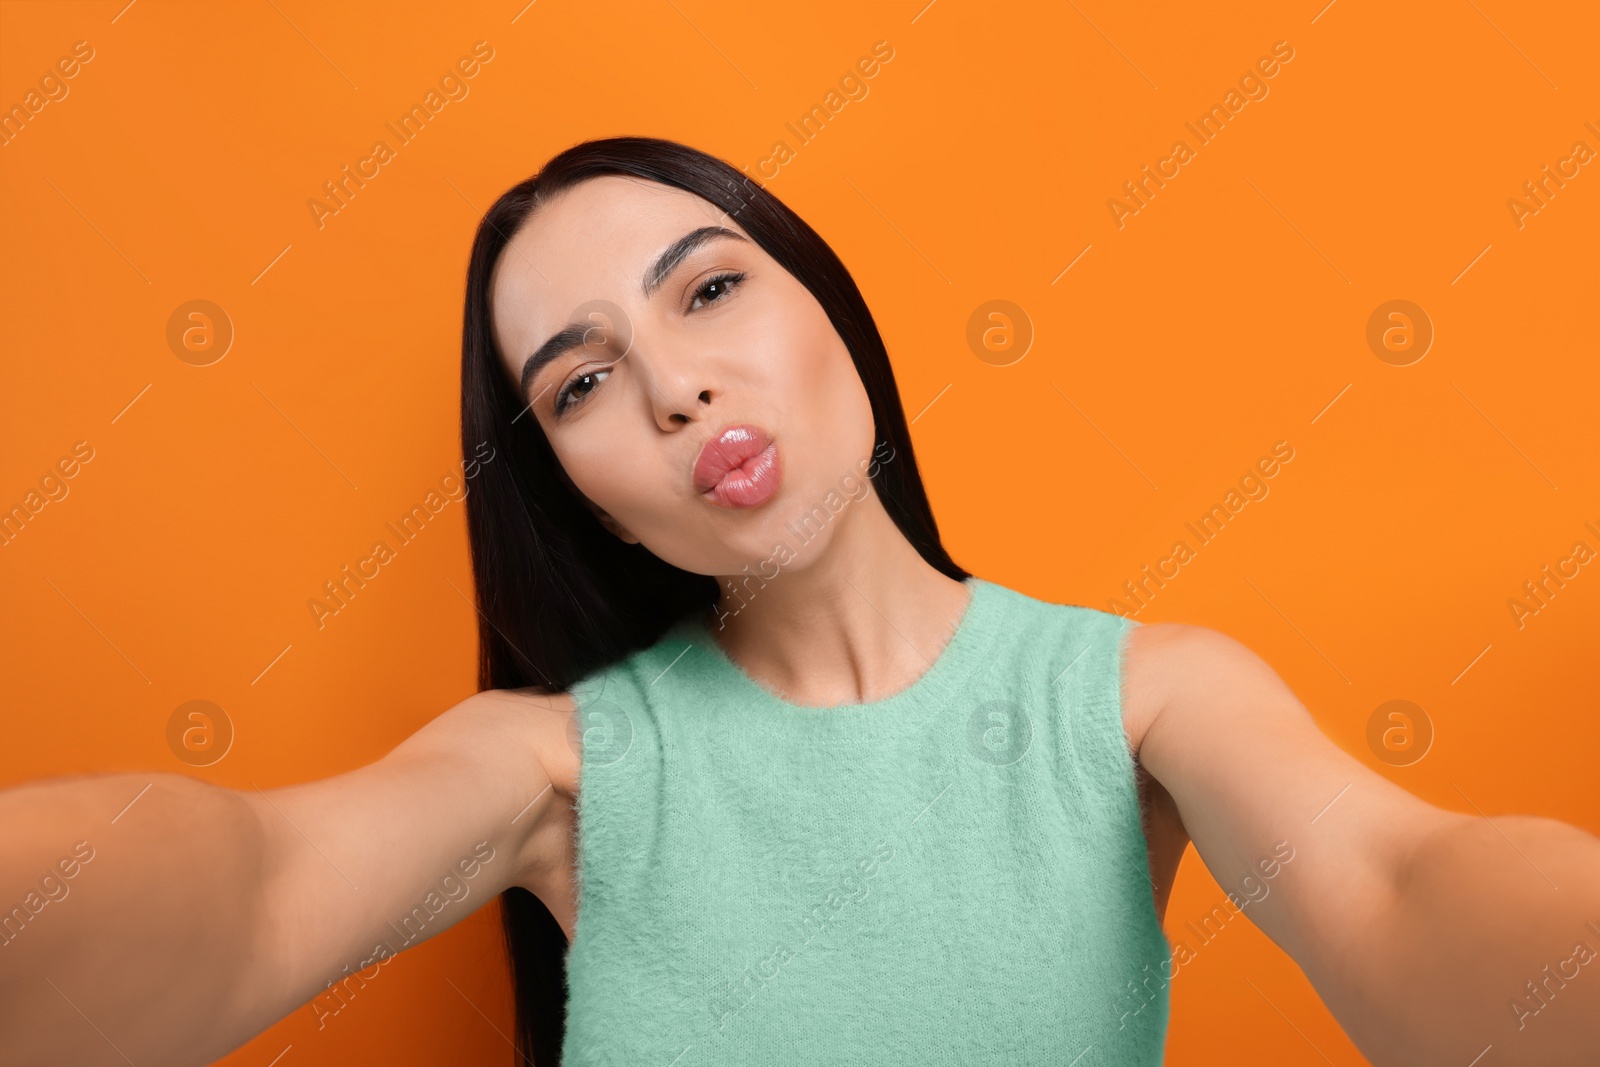 Photo of Beautiful young woman taking selfie while blowing kiss on orange background